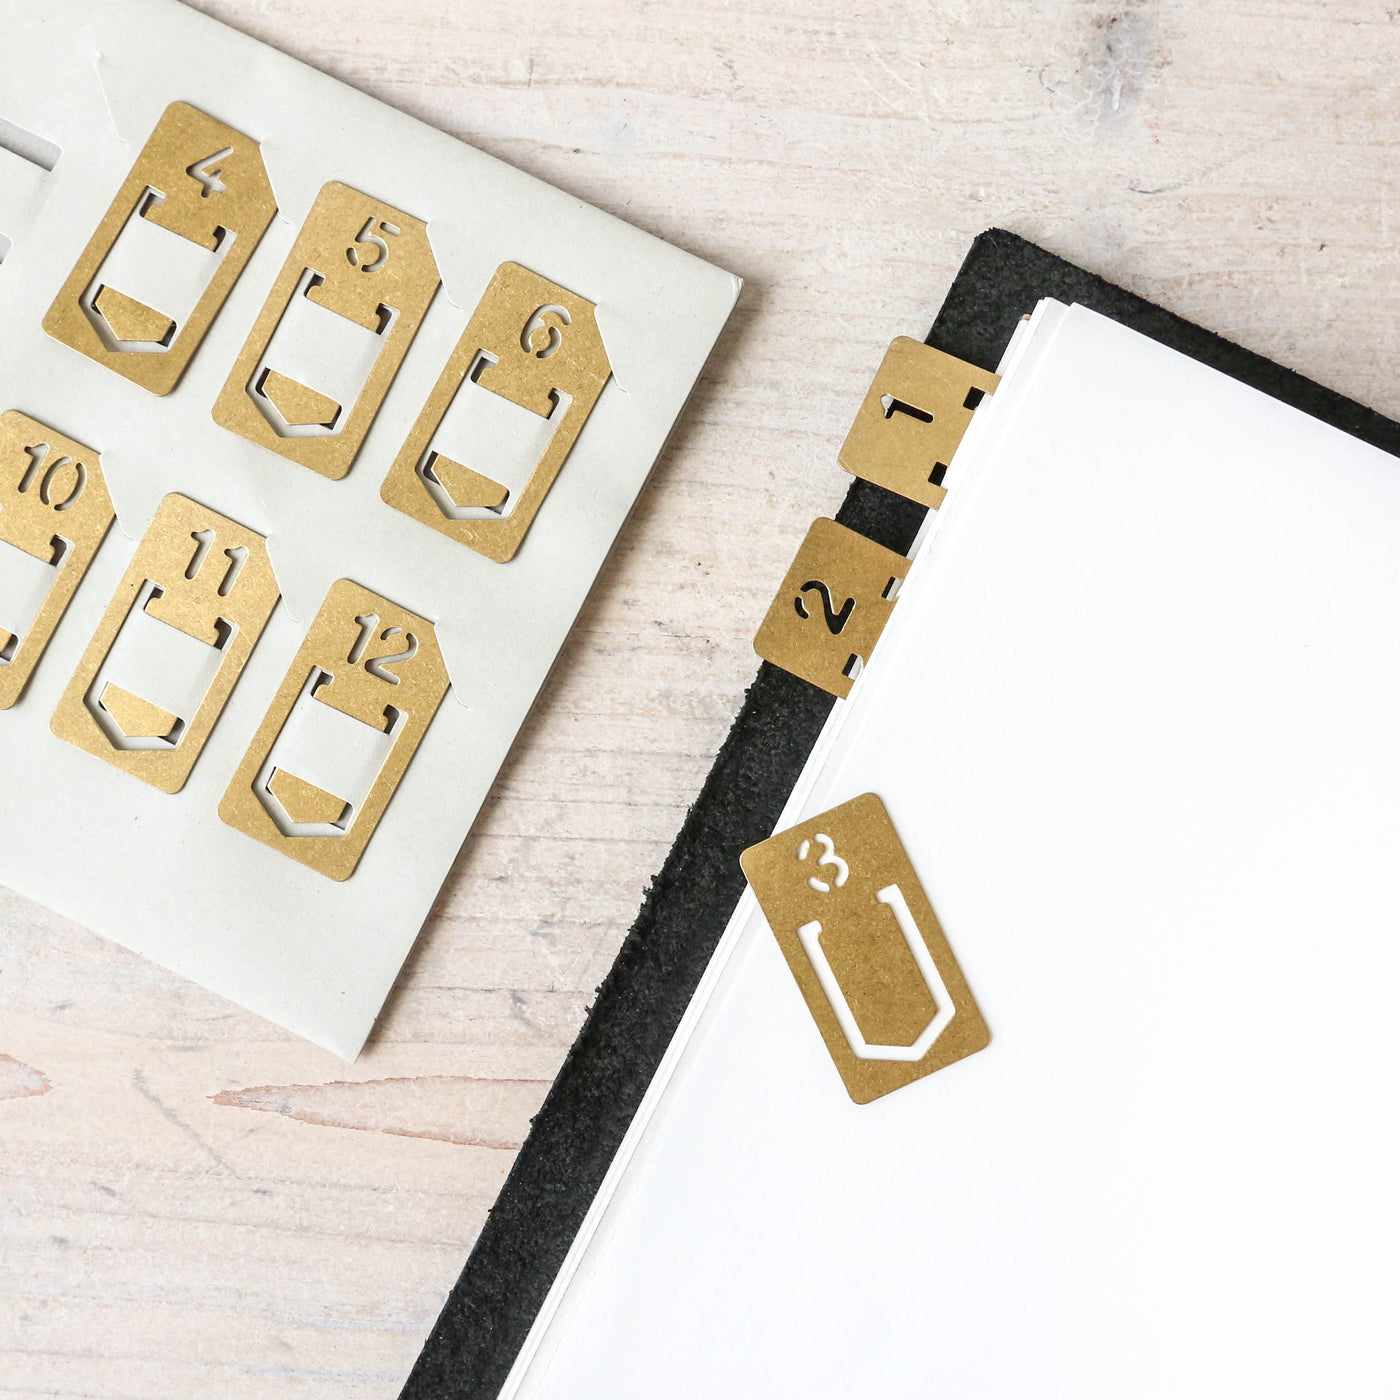 TRAVELER'S COMPANY BRASS Number Clips